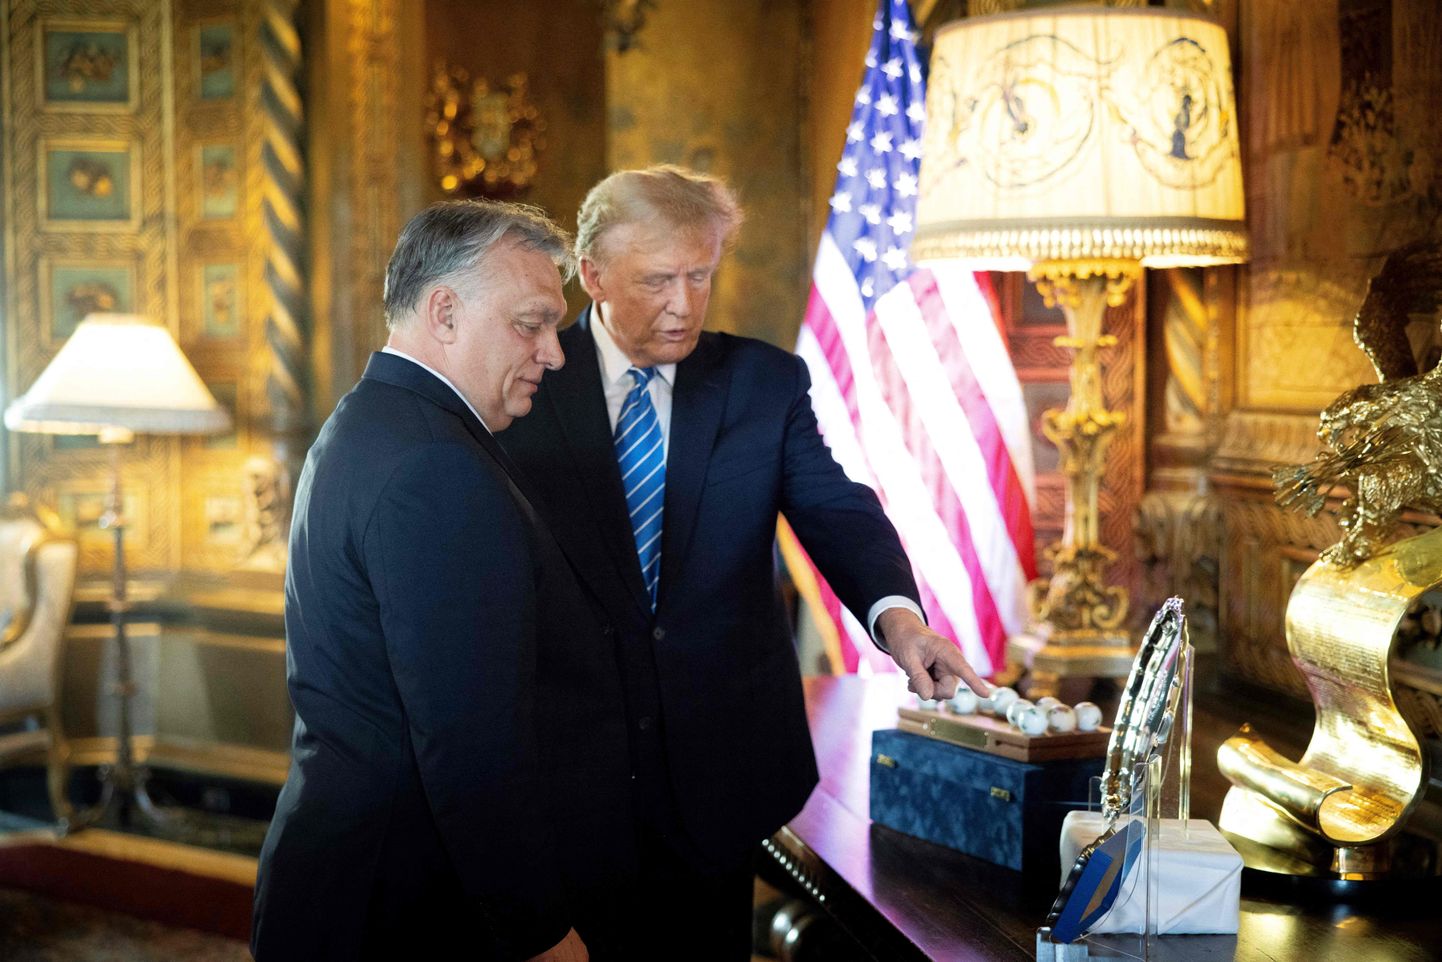 Hungarian Prime Minister Viktor Orban (L) and former US President and Republican presidential candidate, Donald Trump during their meeting at Trump's Mar-a-Lago residence in Palm Beach, Florida.